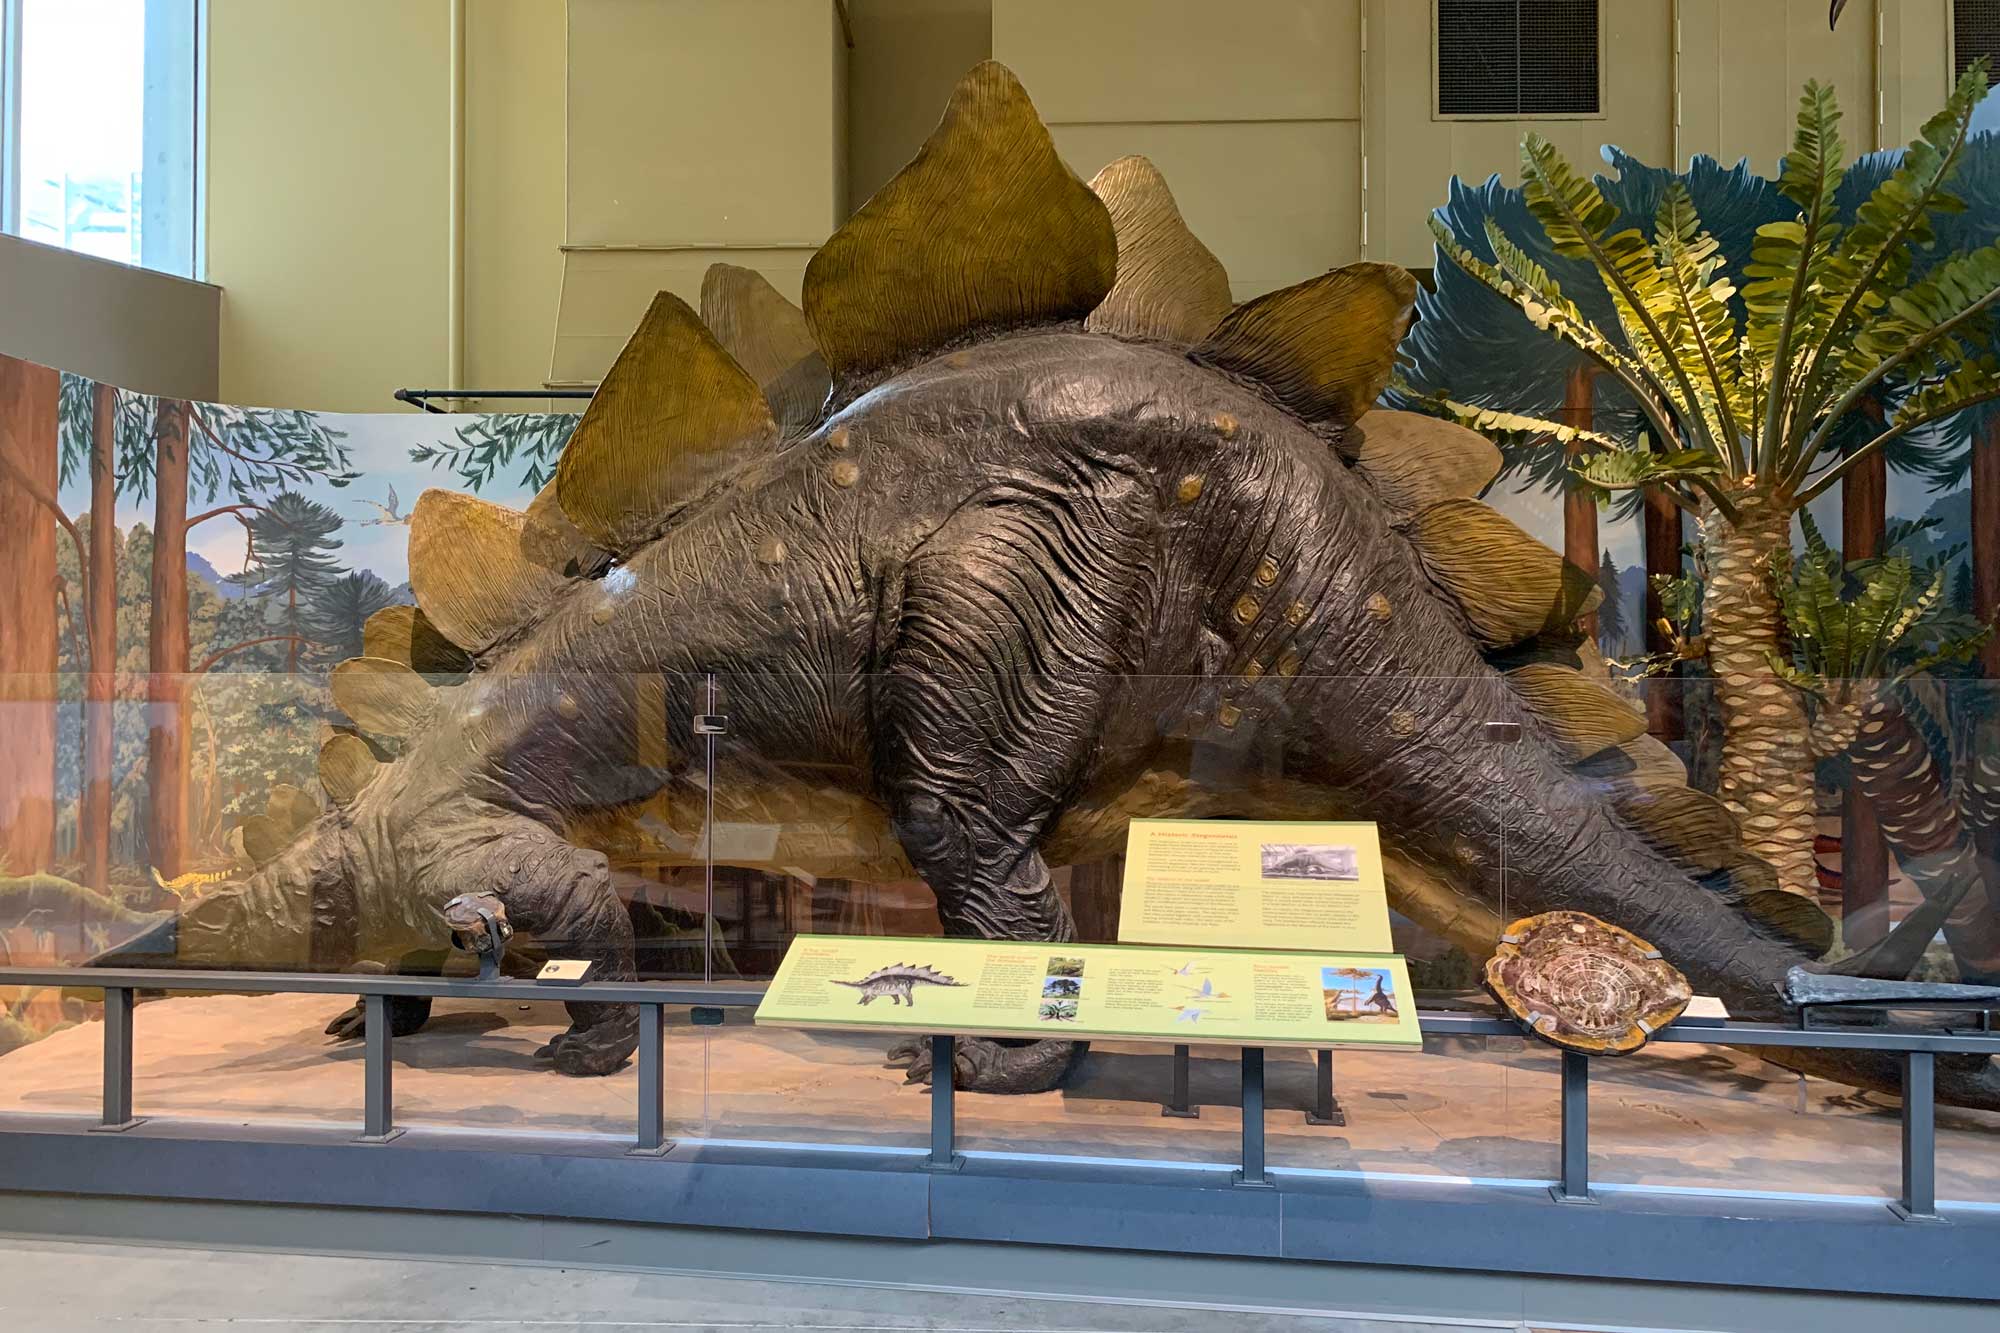 Photograph of Steggy the Stegosaurus model, which was once on display at the Smithsonian and is now at the Museum of the Earth in Ithaca, New York.